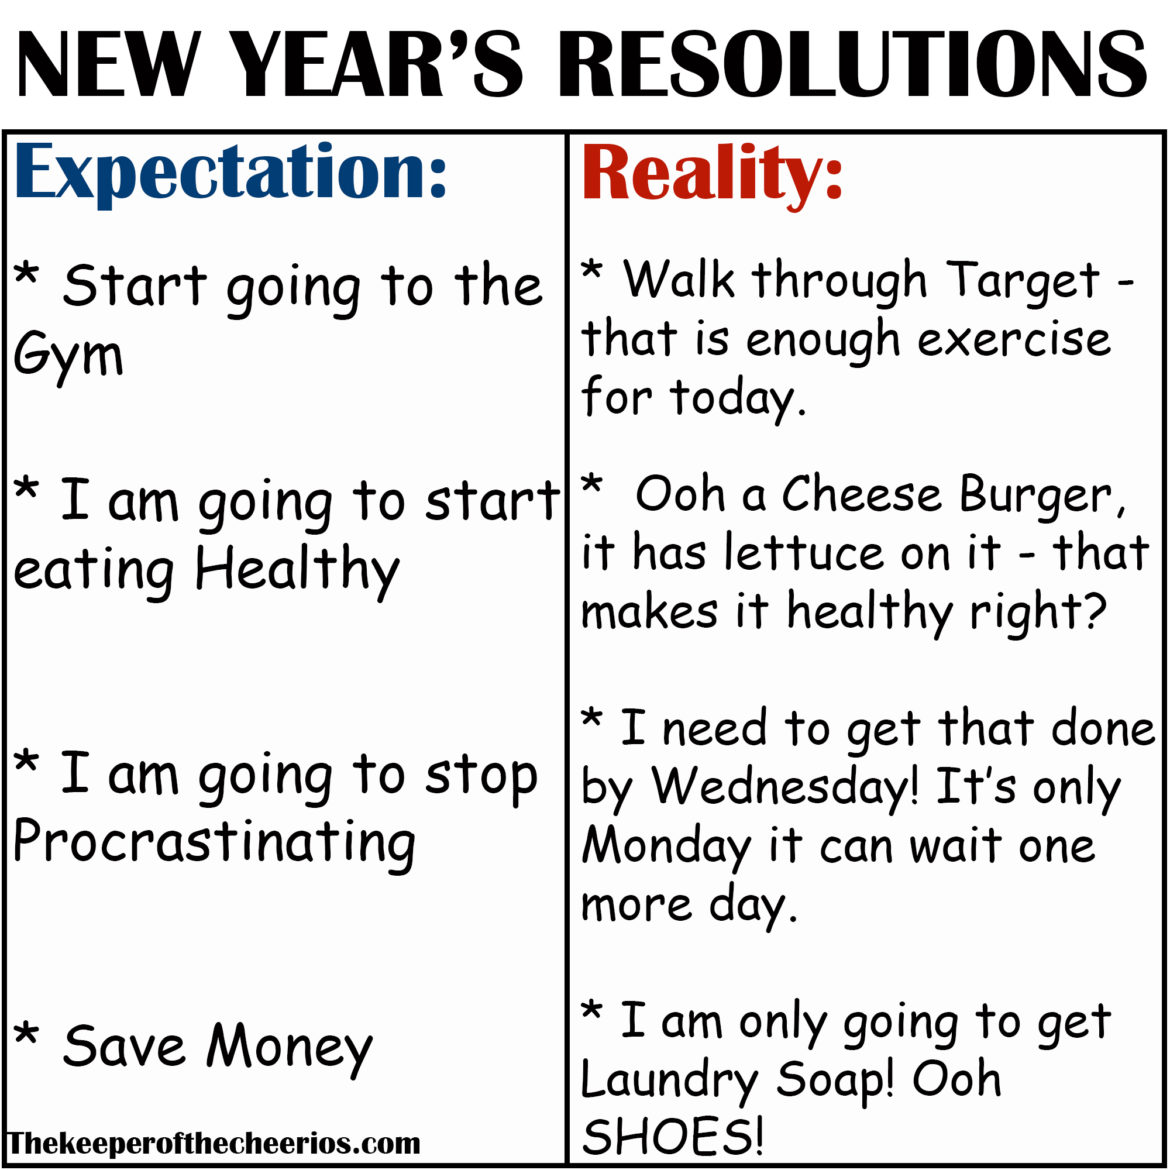 expectation-vs-reality-new-years-resolution